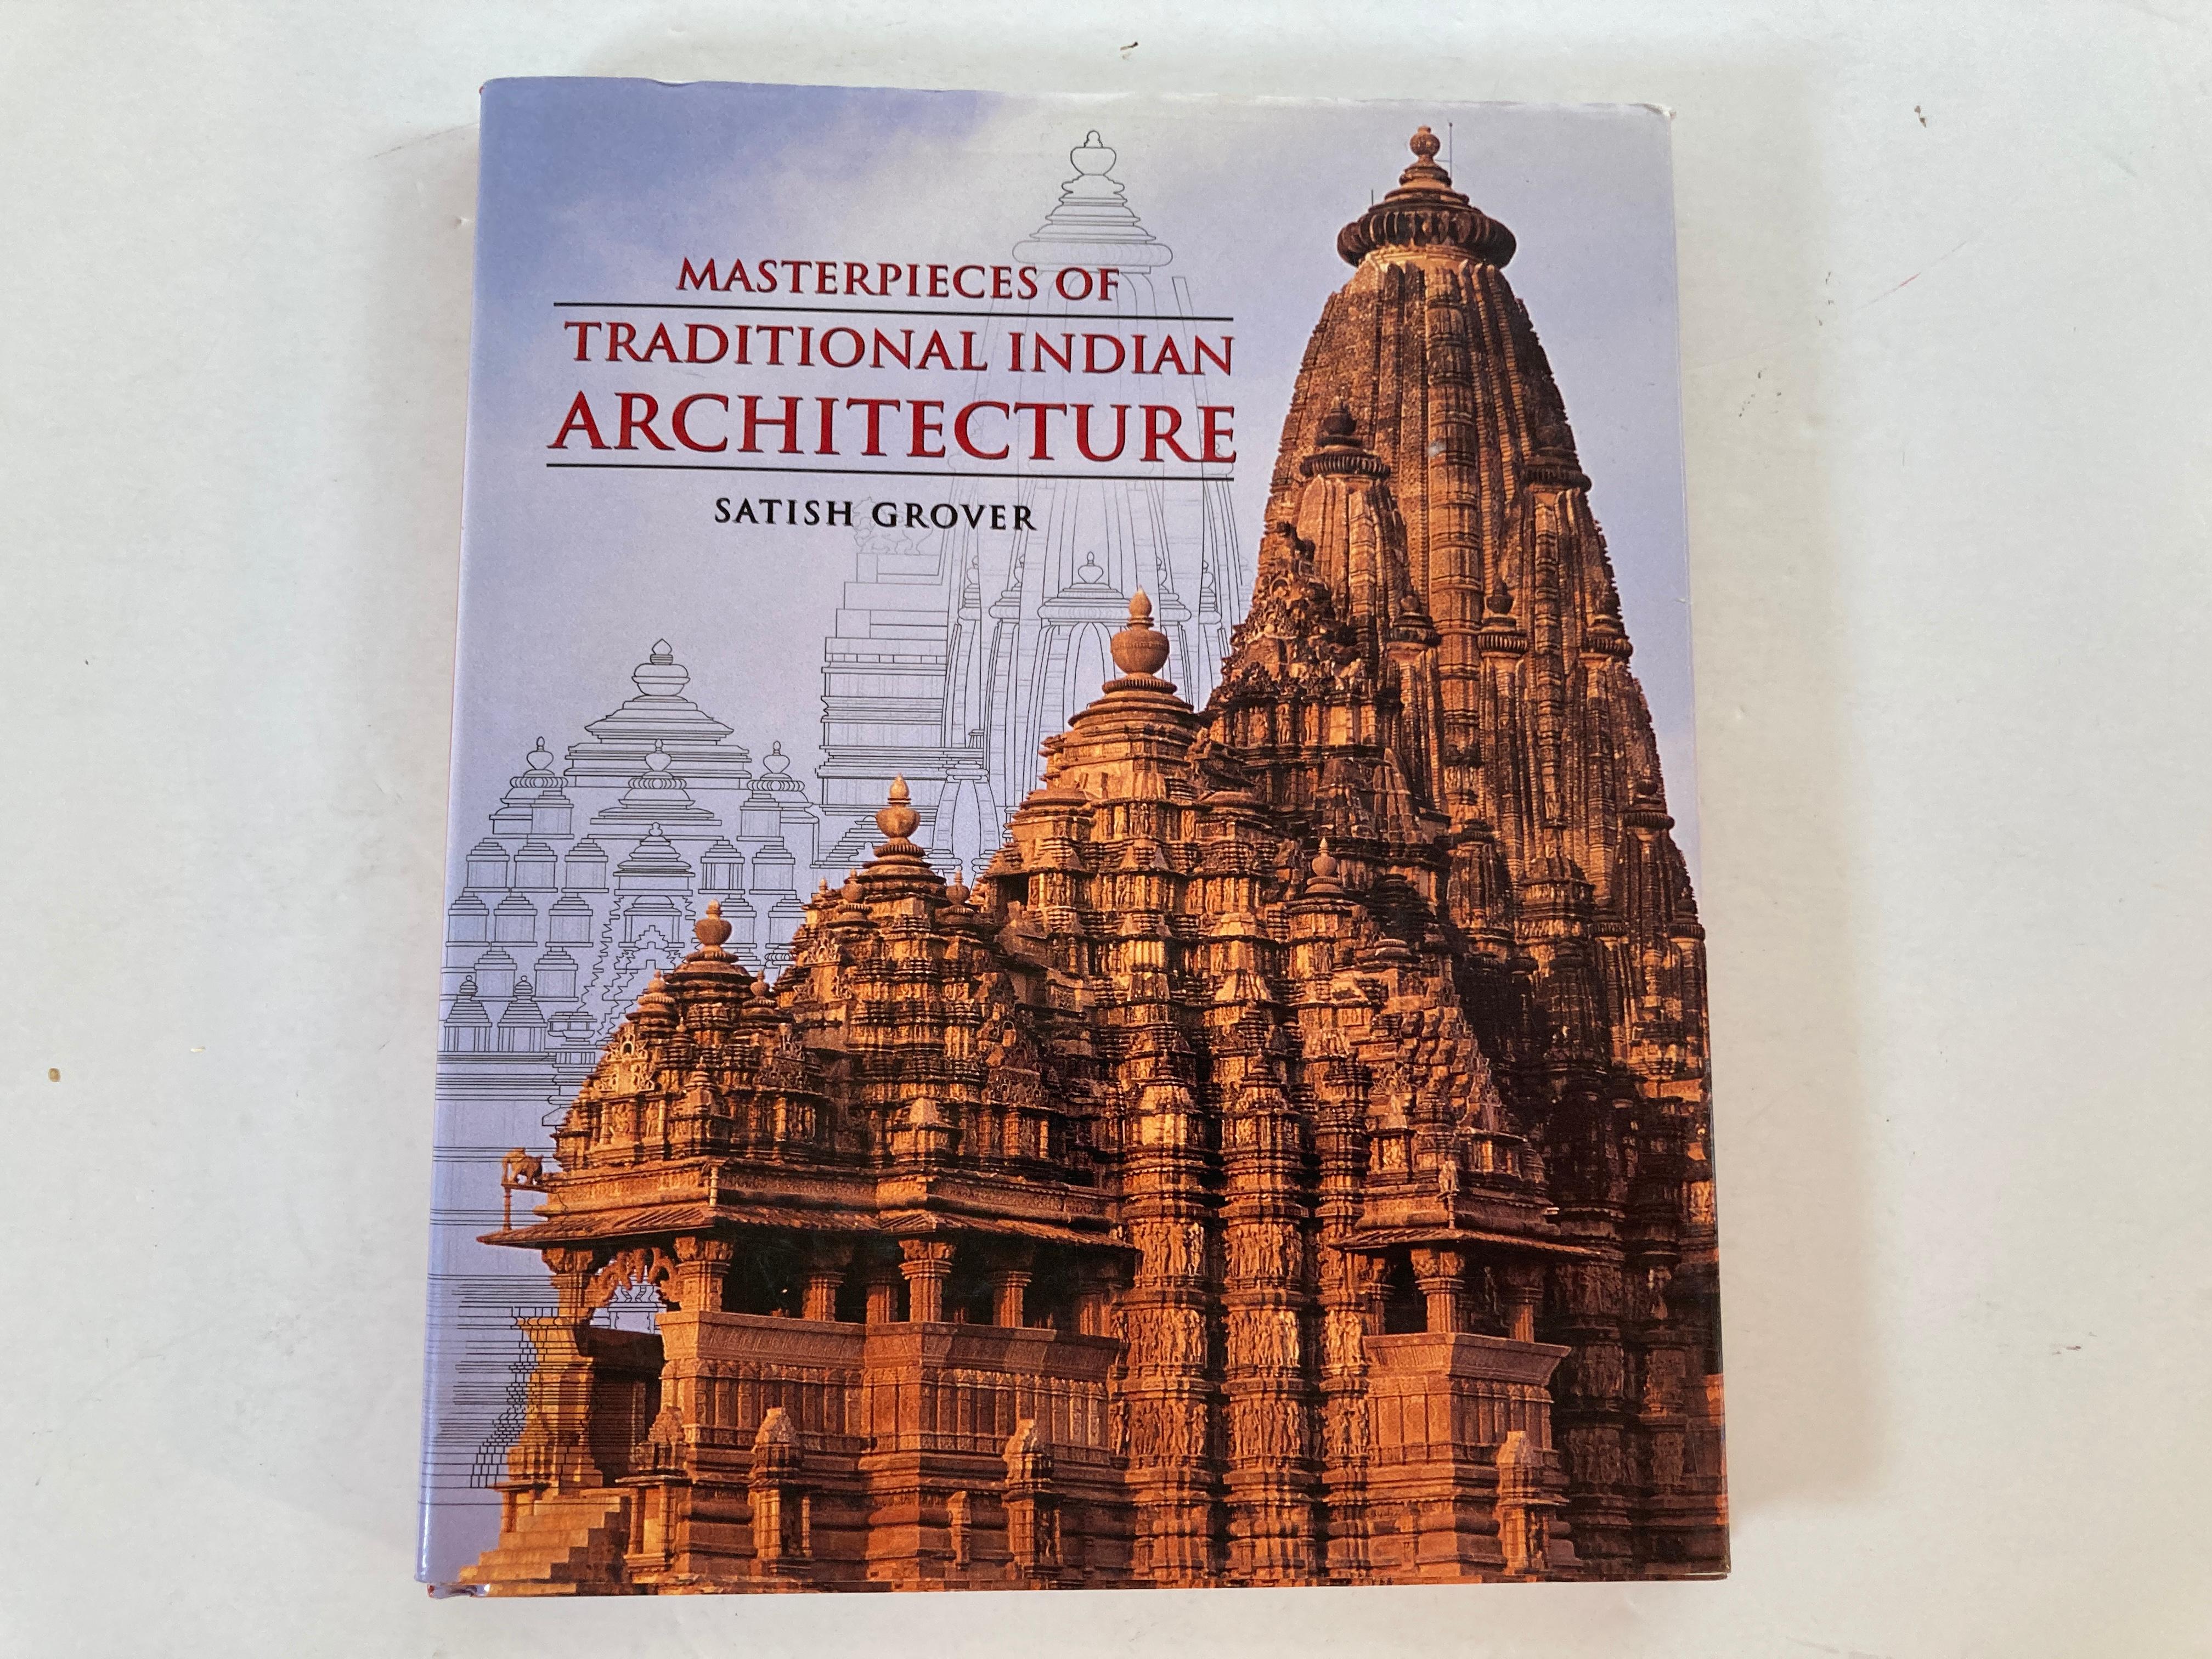 MASTERPIECES OF TRADITIONAL INDIAN ARCHITECTURE
Satish Grover.
Publisher: India: Lustre Press/Roli Books
Publication Date: 2004
Binding: Hardcover
Book Condition: Very Good
Dust Jacket Condition: very good
Edition: First edition.
This is a beautiful